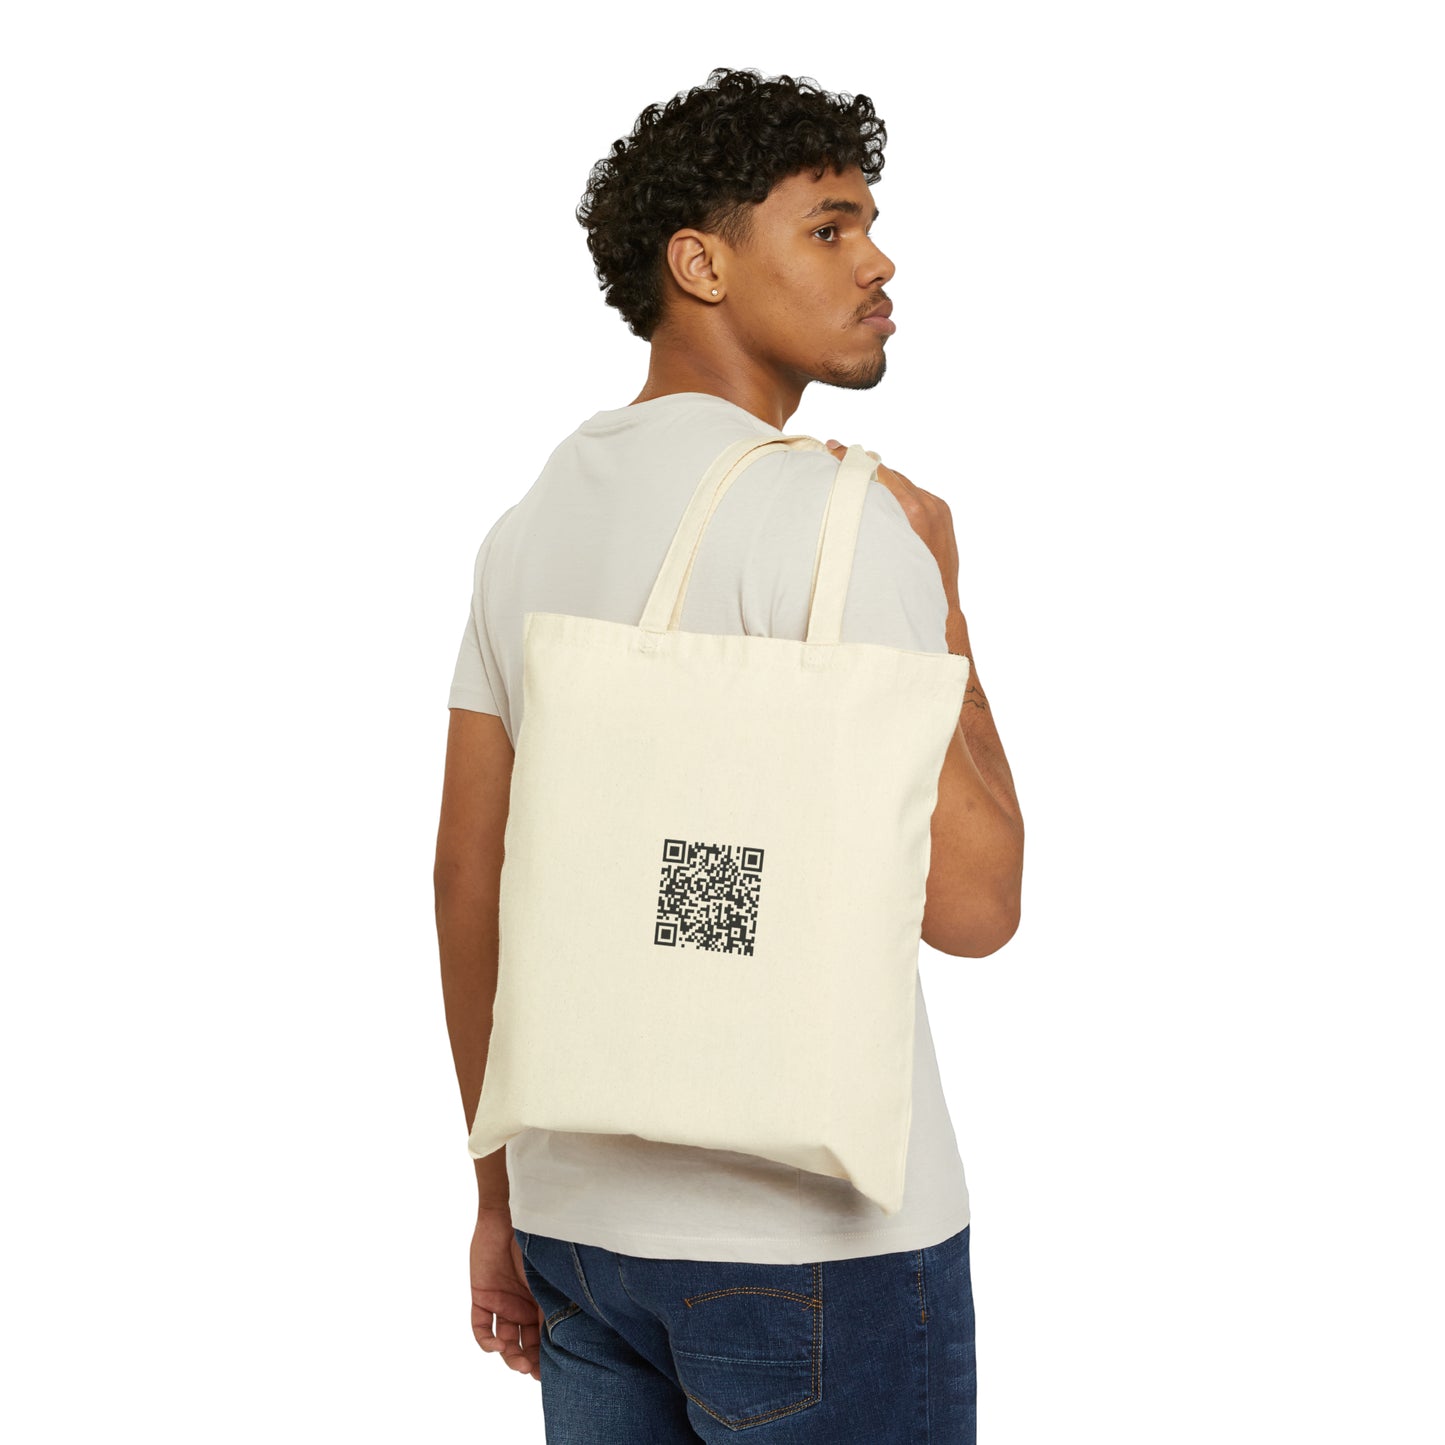 Not Without My Passport - Cotton Canvas Tote Bag